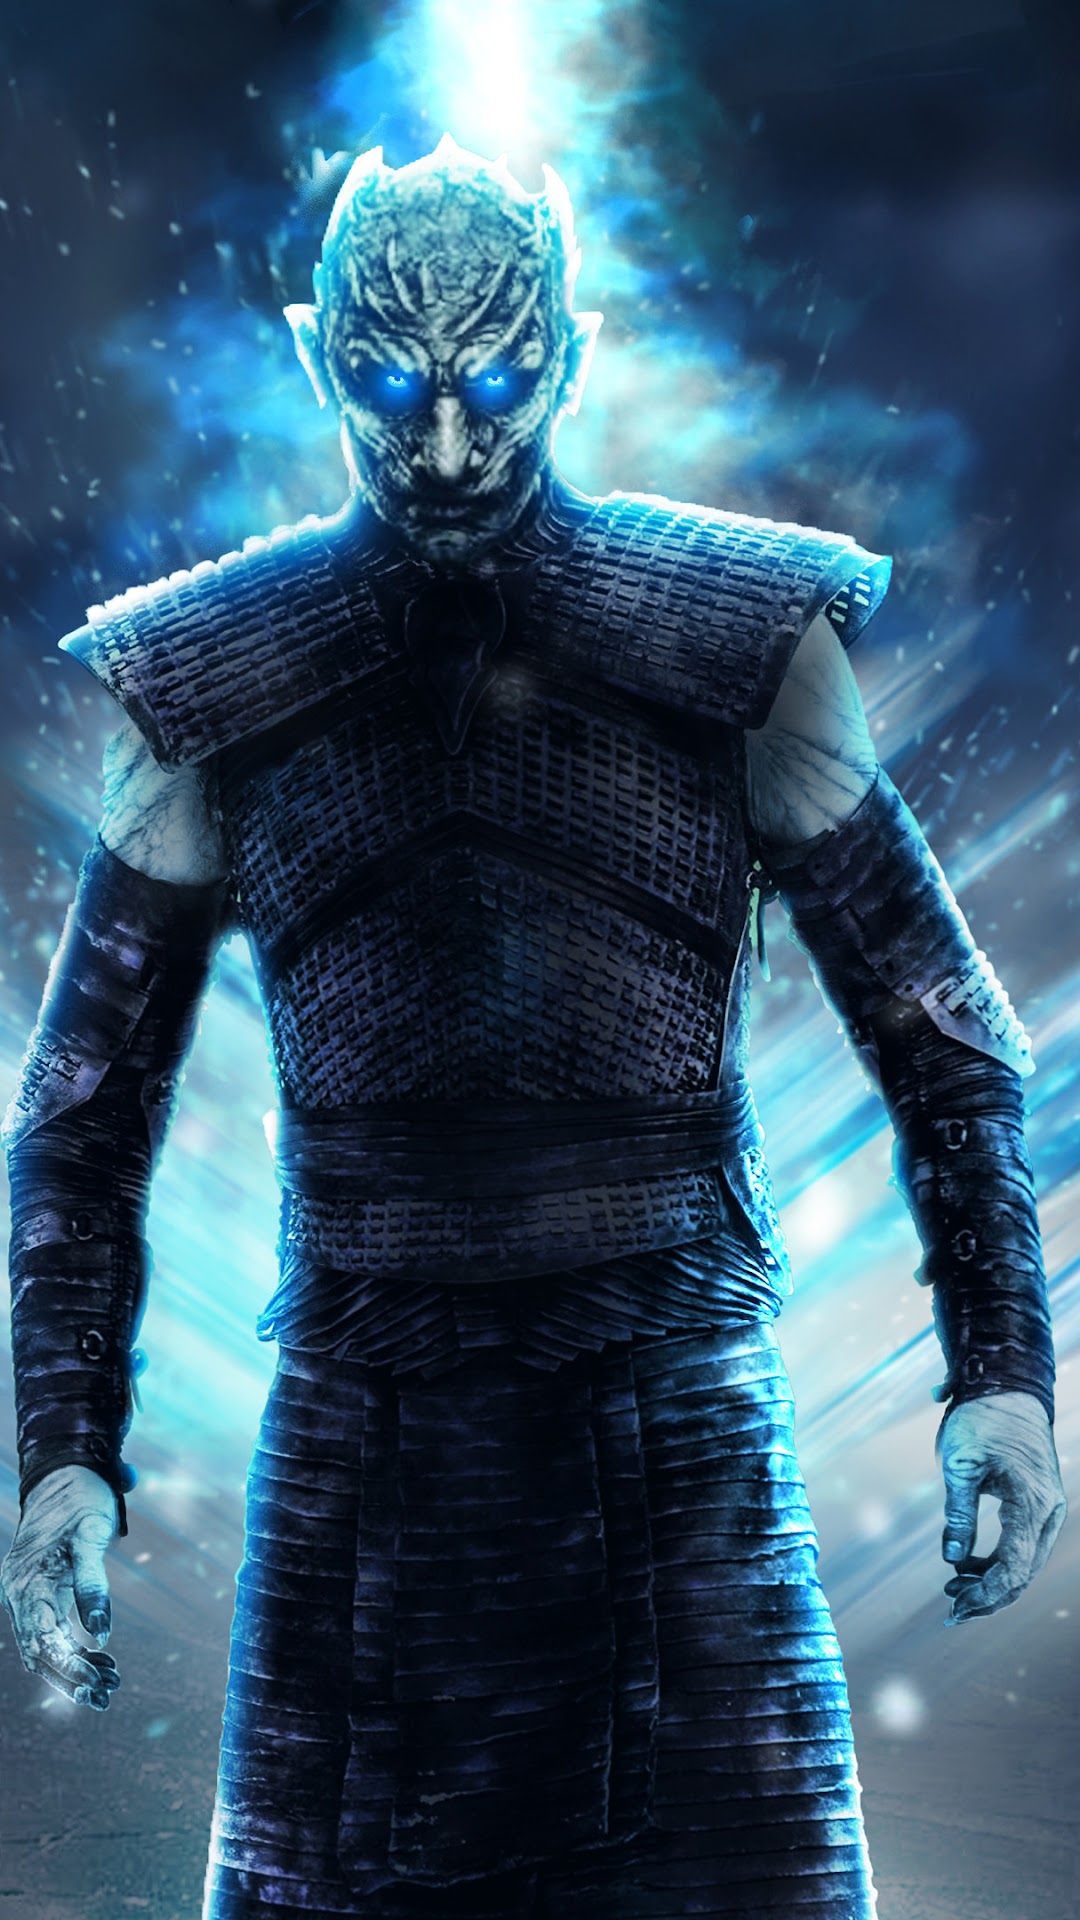 1080x1920  1080x1920 night king game of thrones season 8 game of thrones  tv shows hd illustration minimalism minimalist deviantart for Iphone  6 7 8 wallpaper  Coolwallpapersme